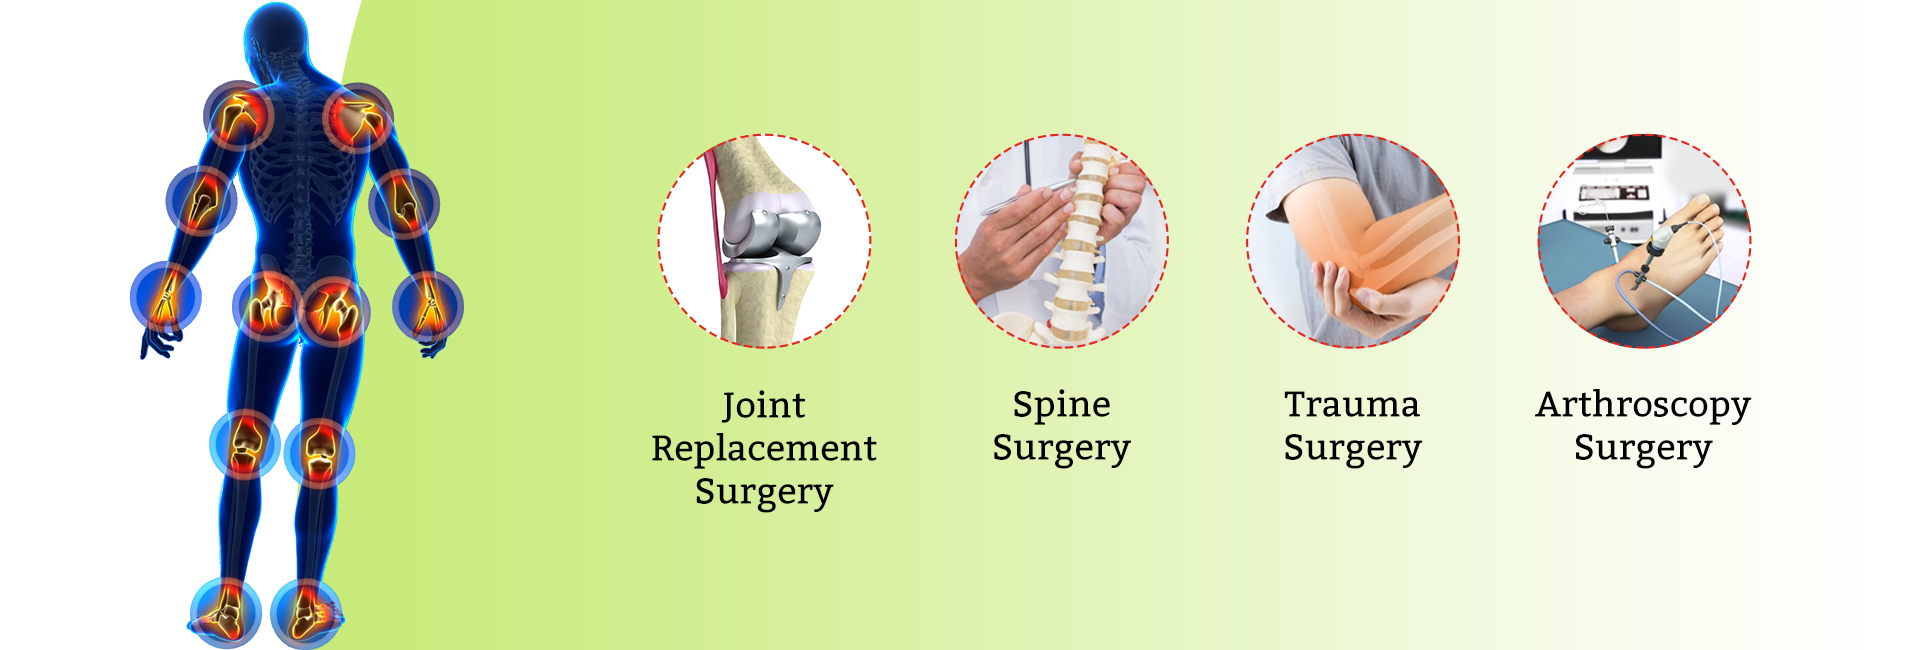 Contact Dr. Dhruv Patel for Joint Replacement Surgery, Spine Surgery, Trauma Surgery, and Arthroscopy Surgery Specialist in Navi Mumbai, Vashi & Belapur